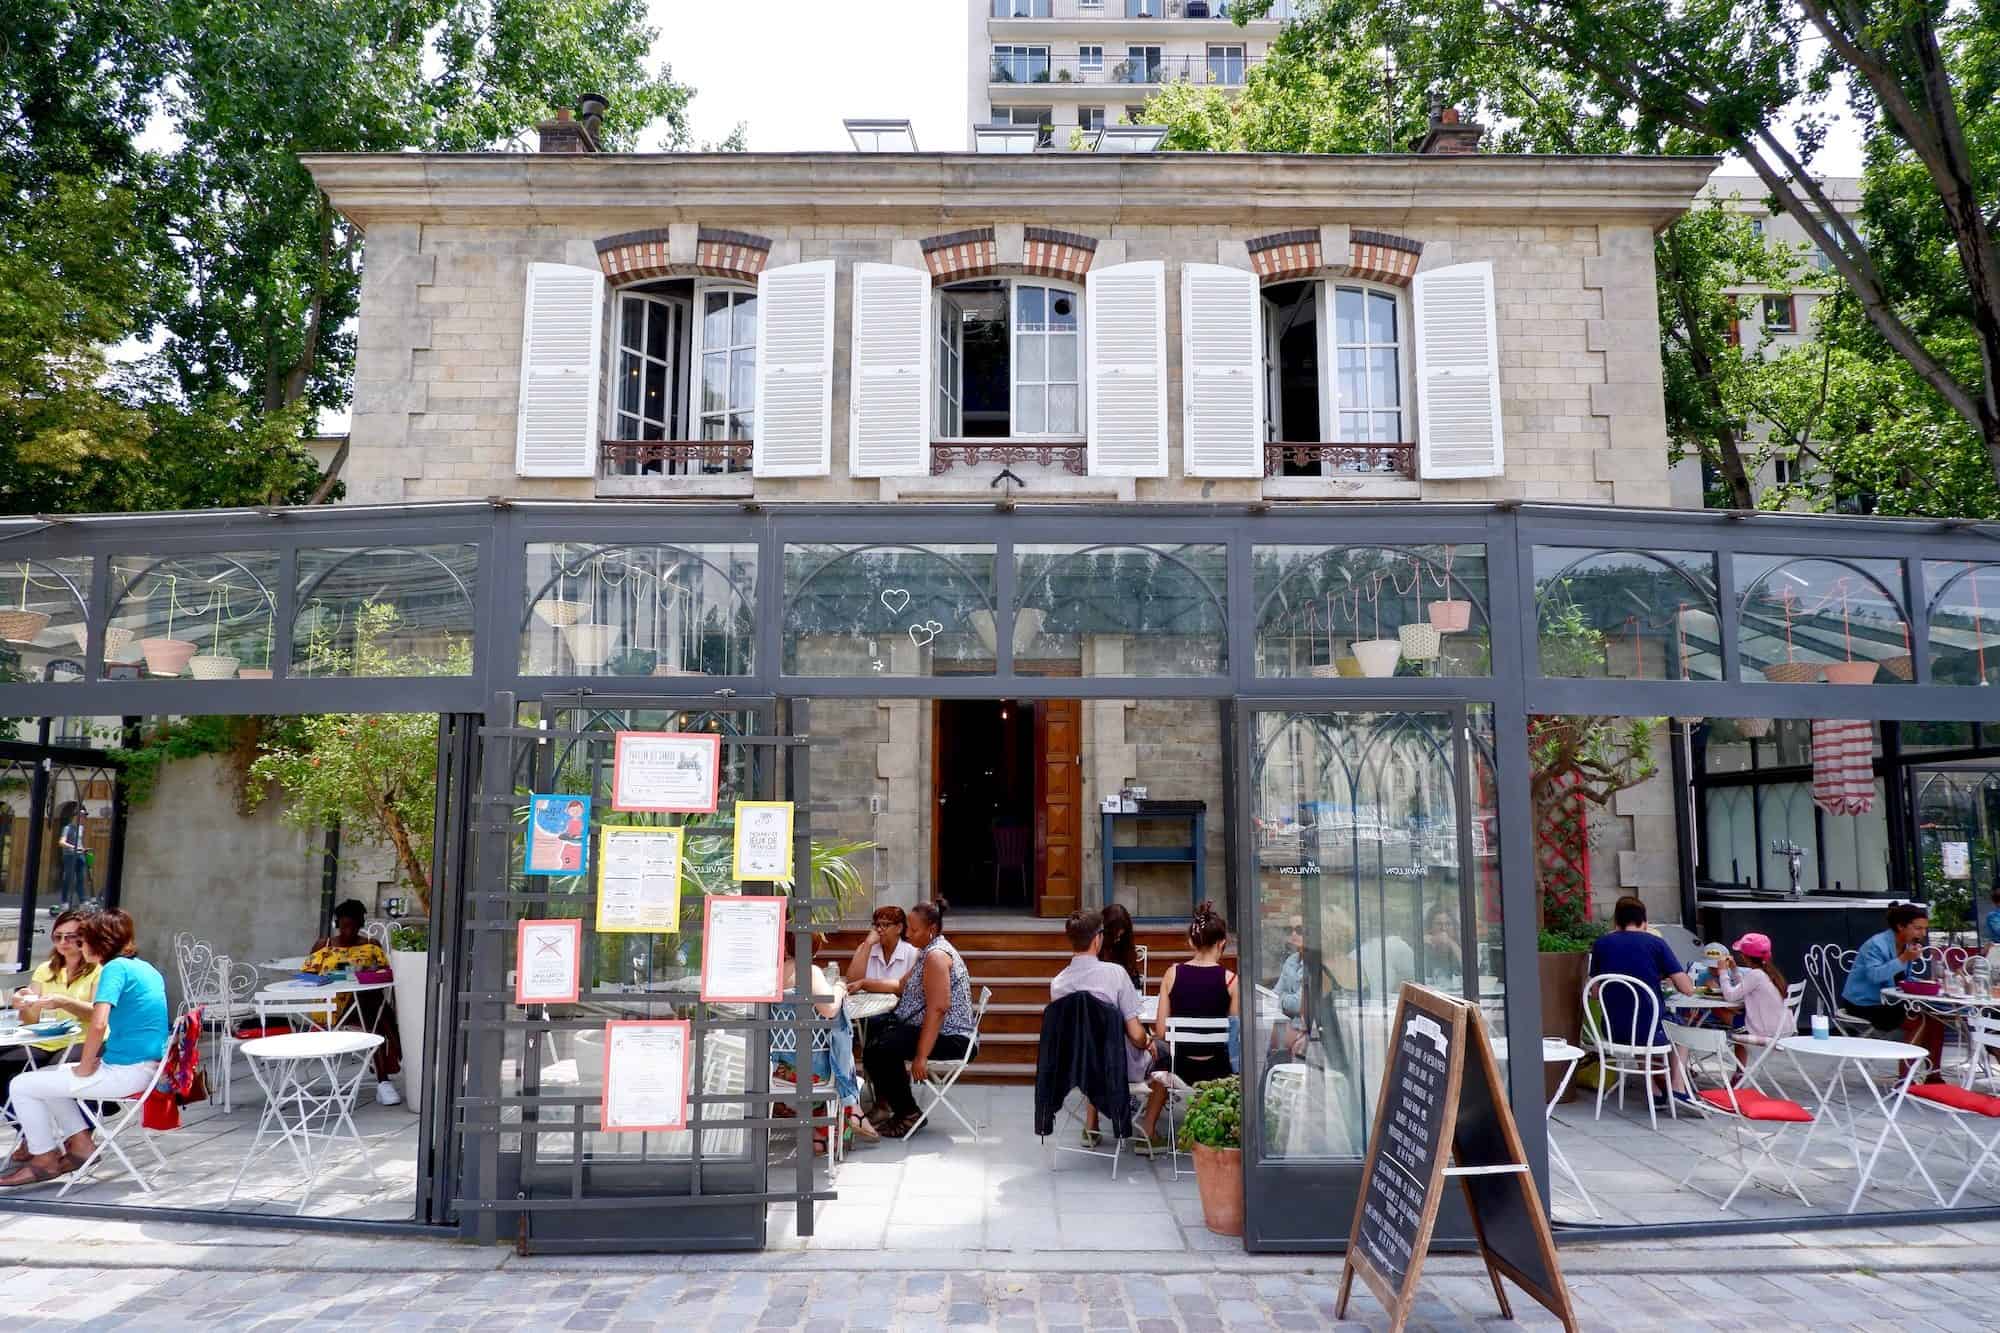 Pavillon des Canaux is also a local favorite located on the Canal de l'Ourcq, and serves delicious cakes and salads as well as cocktails, beer and wine.